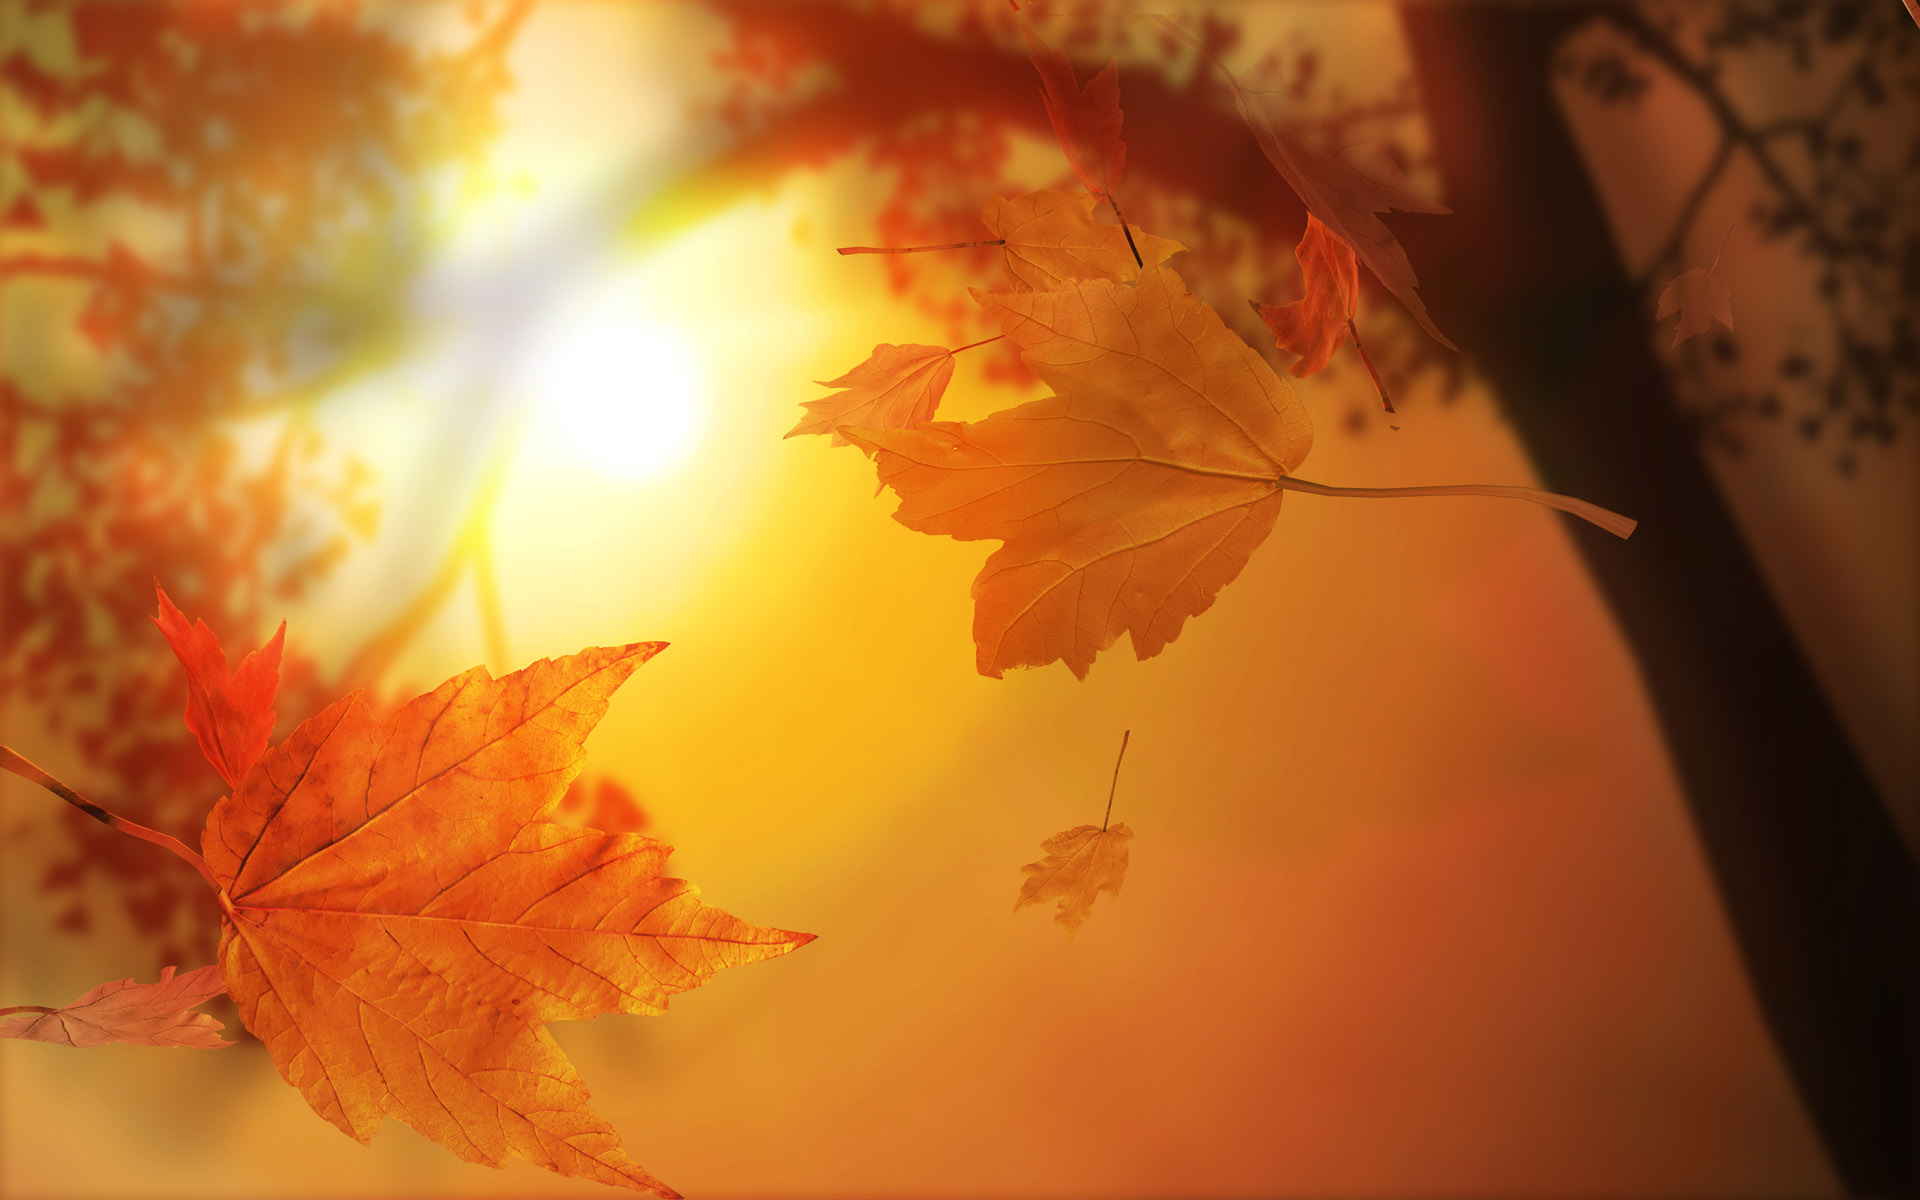 Autumn leaves falling against a warm sunset backdrop for a tranquil HD desktop wallpaper.